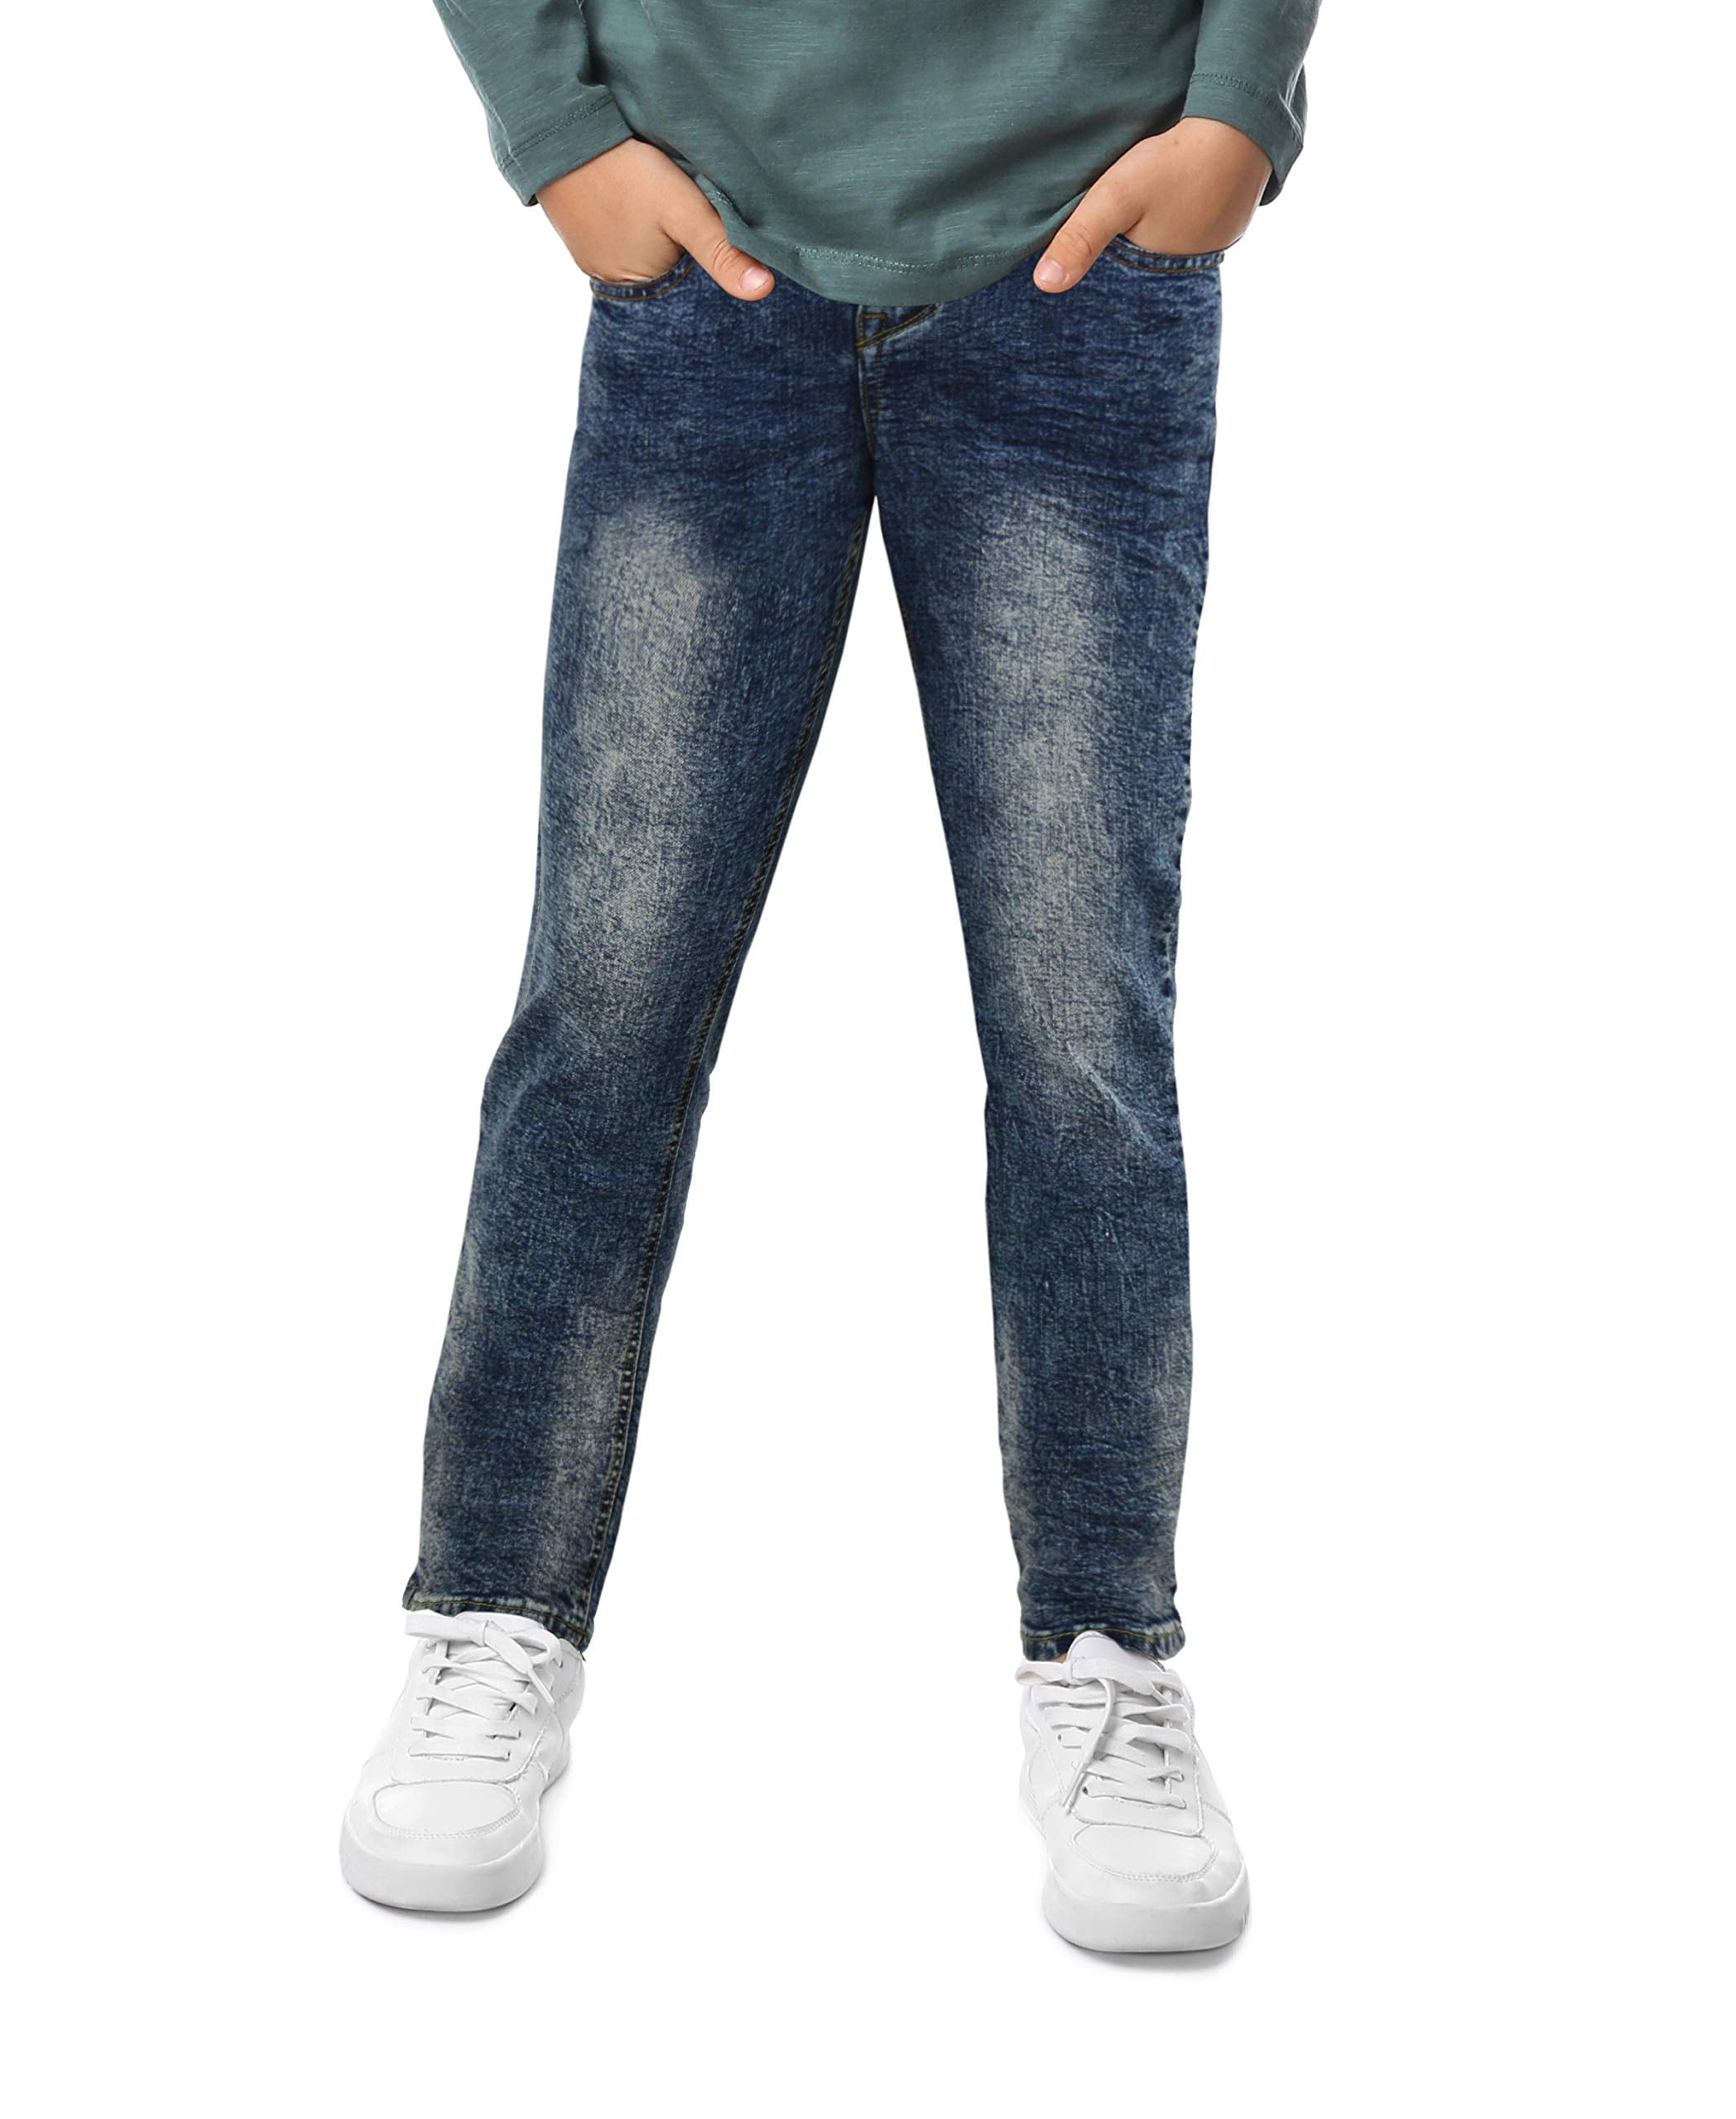 Boys Skinny Fit Ripped Distressed Elastic Waist Zipper Jeans with Holes for Kids